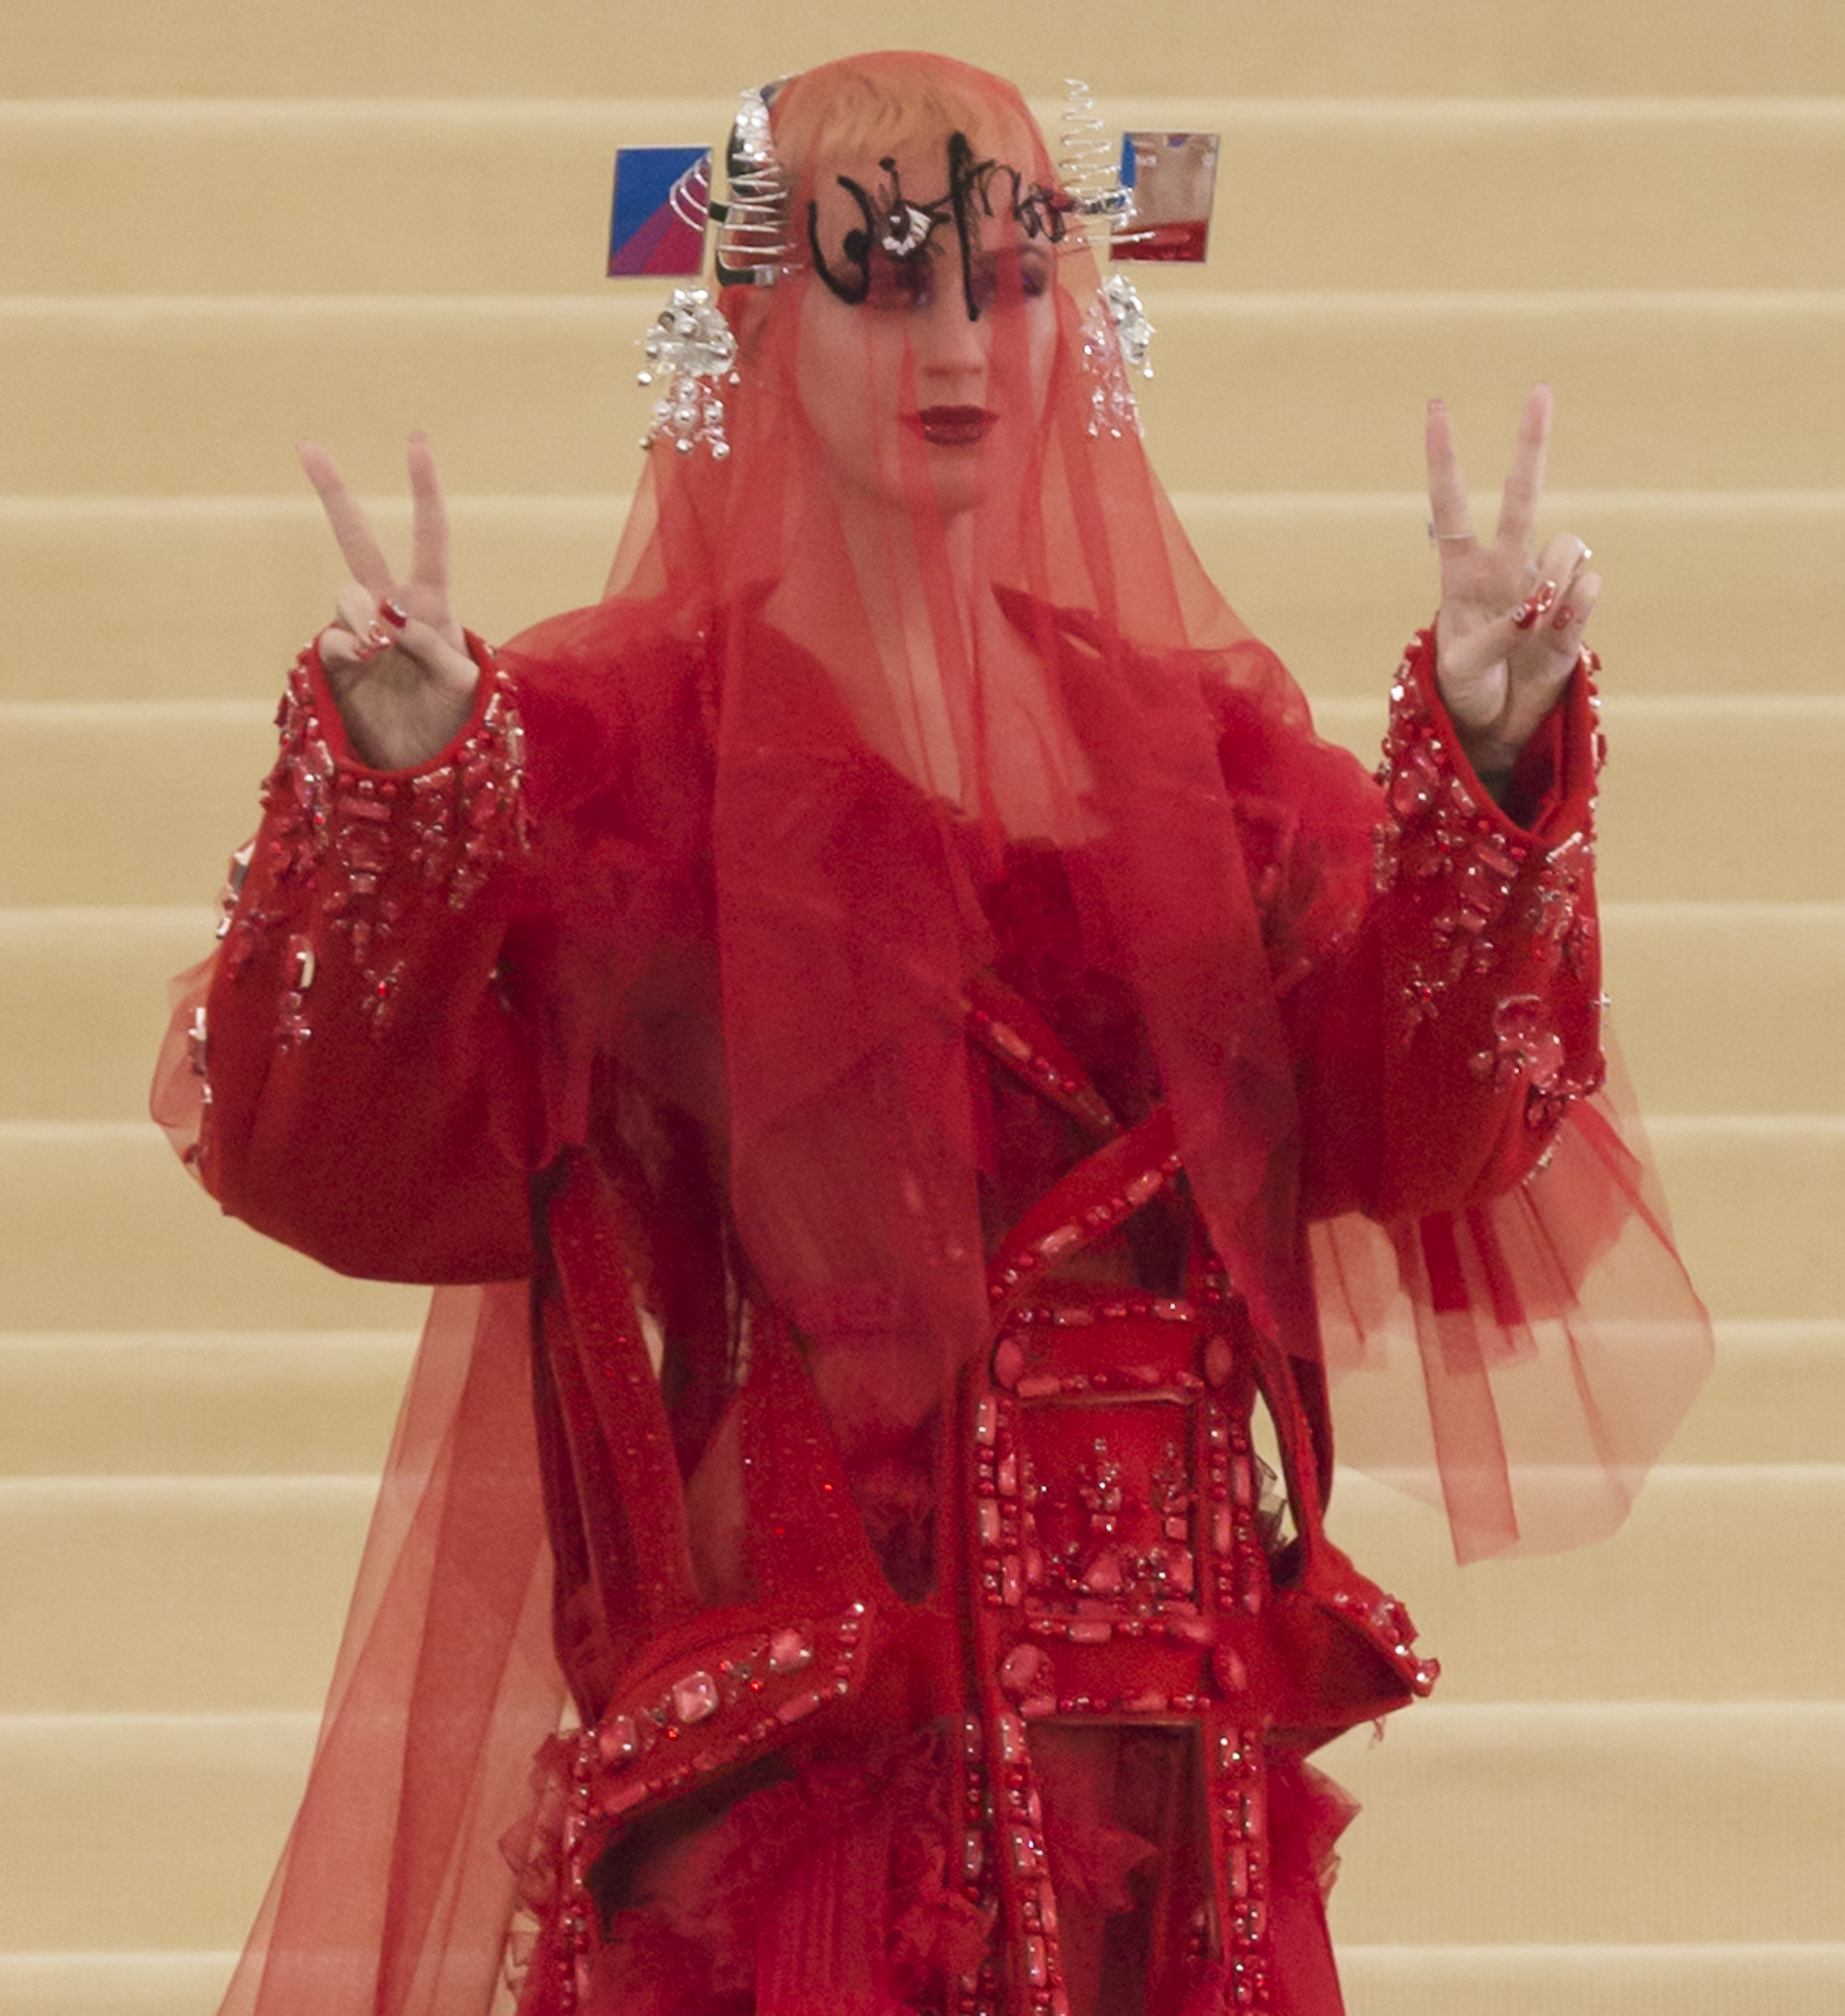 What is the met gala? And a look at what to expect at met gala 2019.